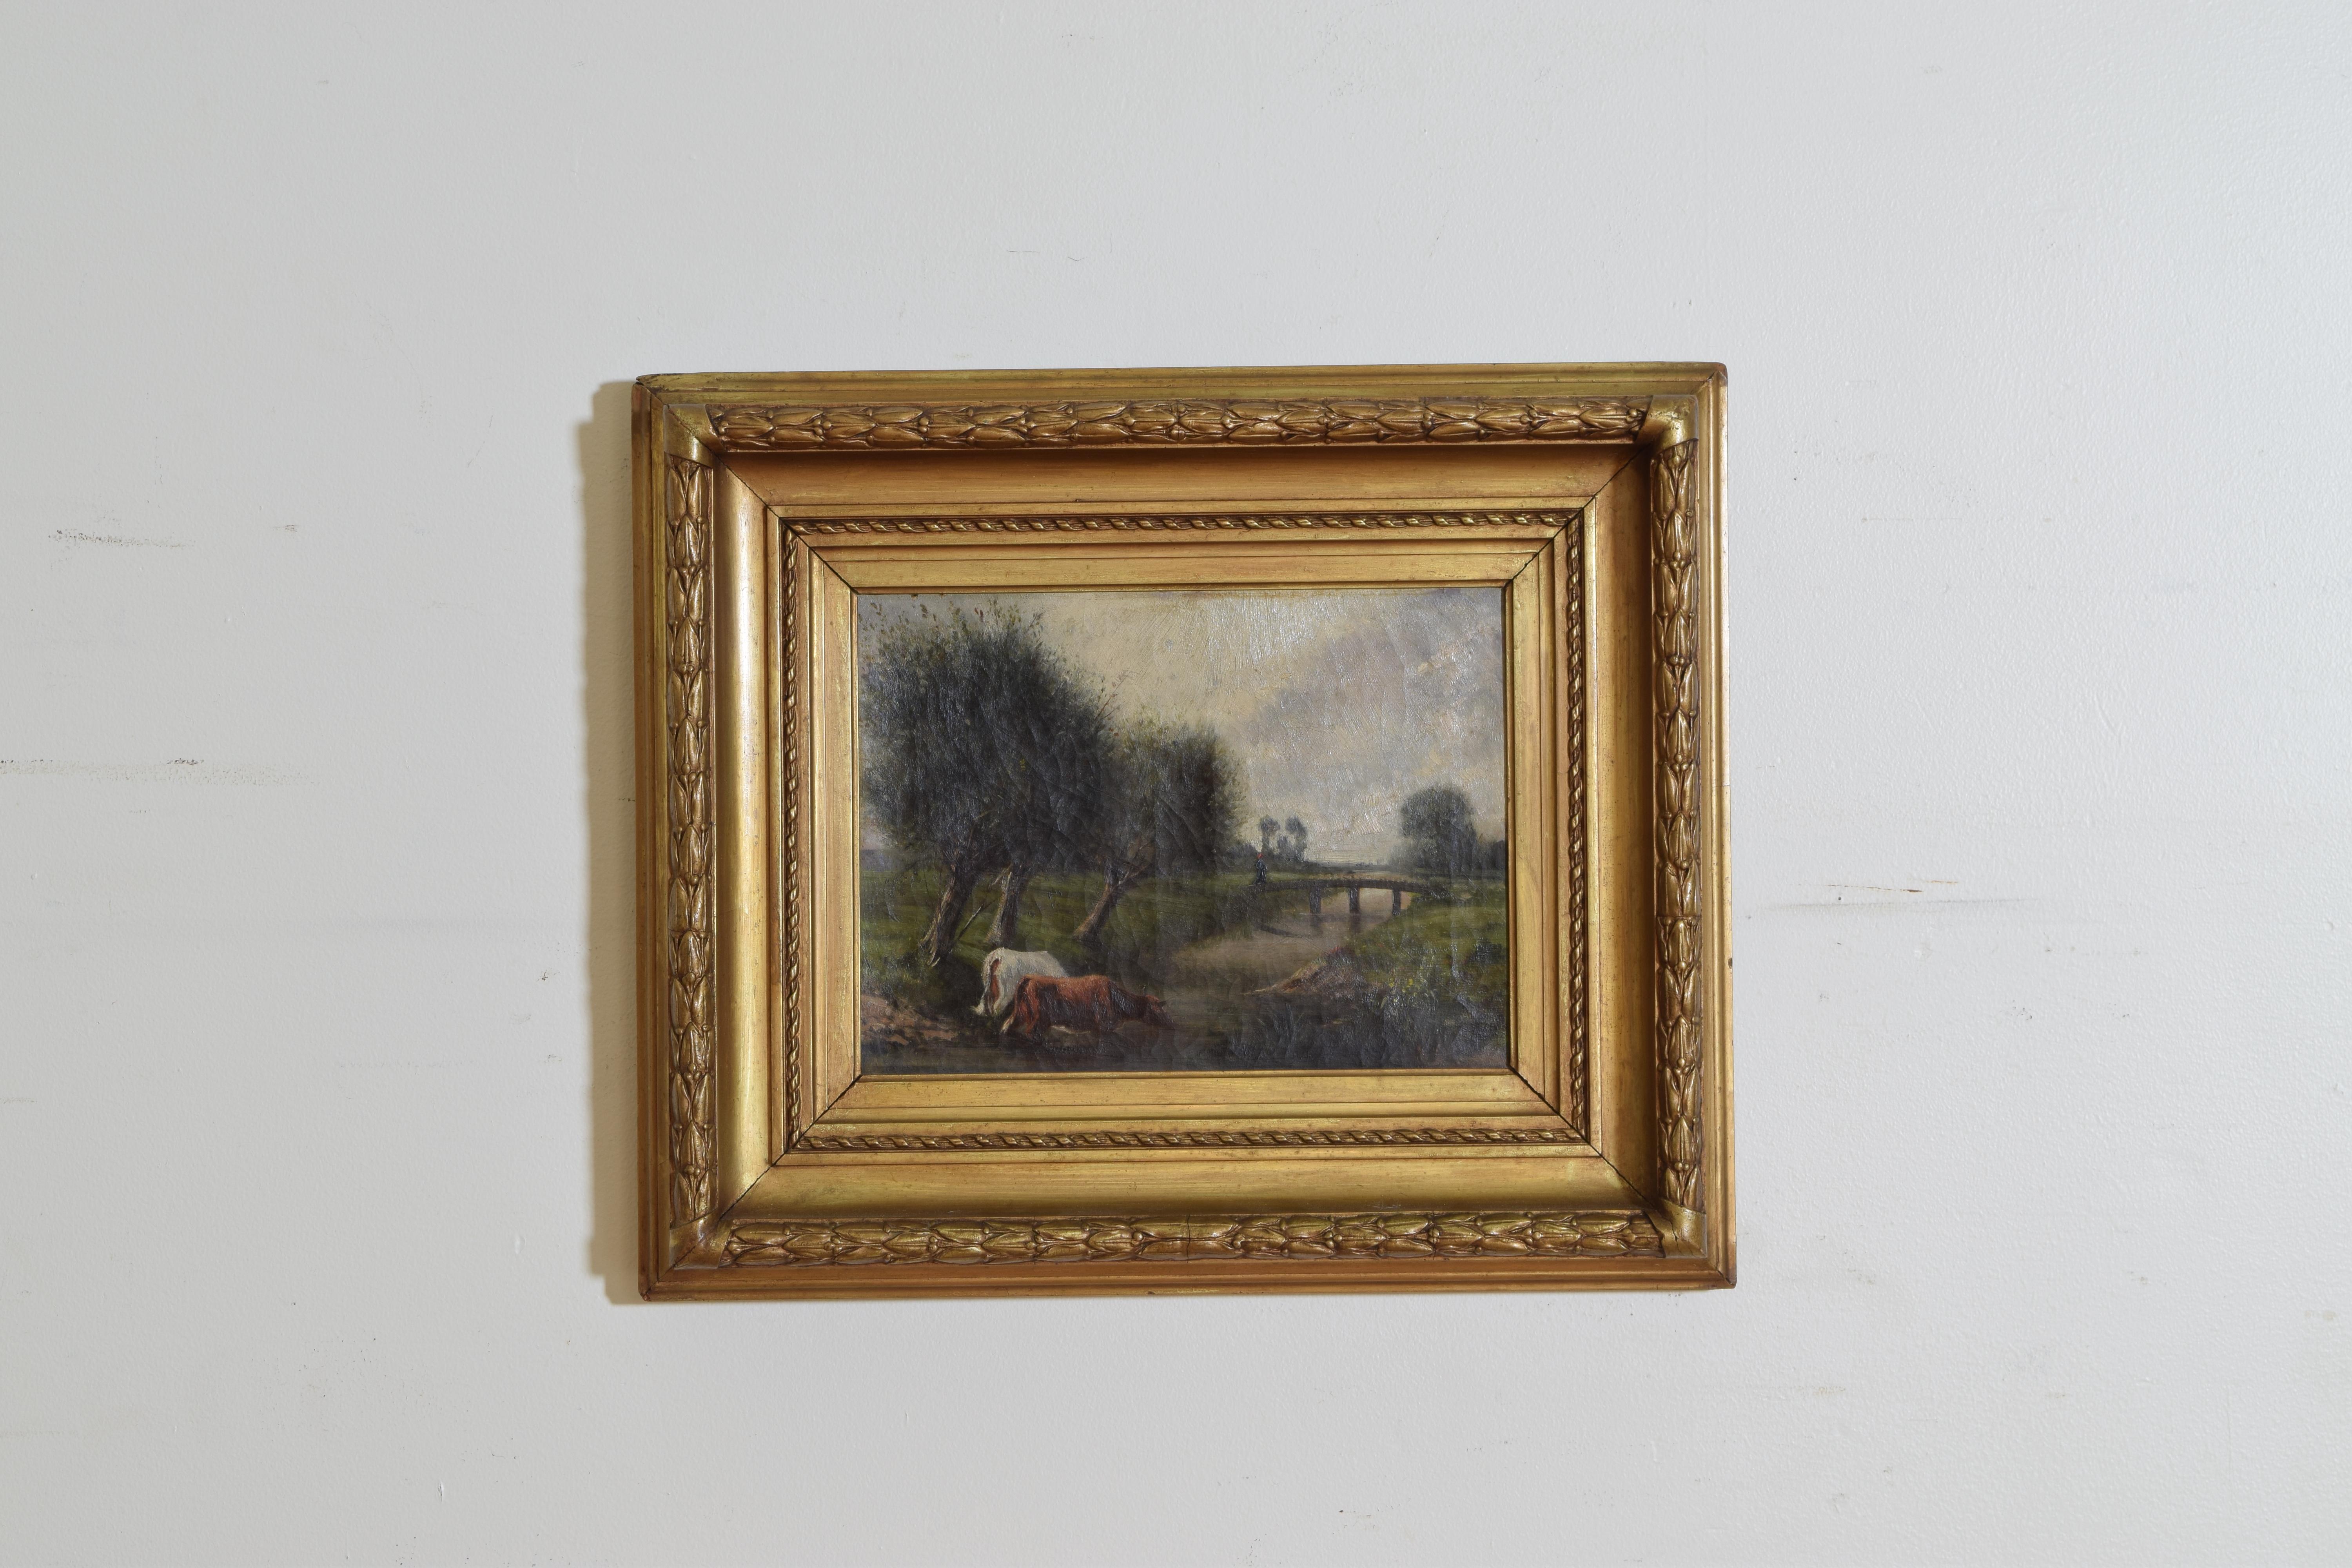 From the mid-19th century this painting depicts cows grazing in a meadow with a lone figure crossing a bridge in the middle ground.